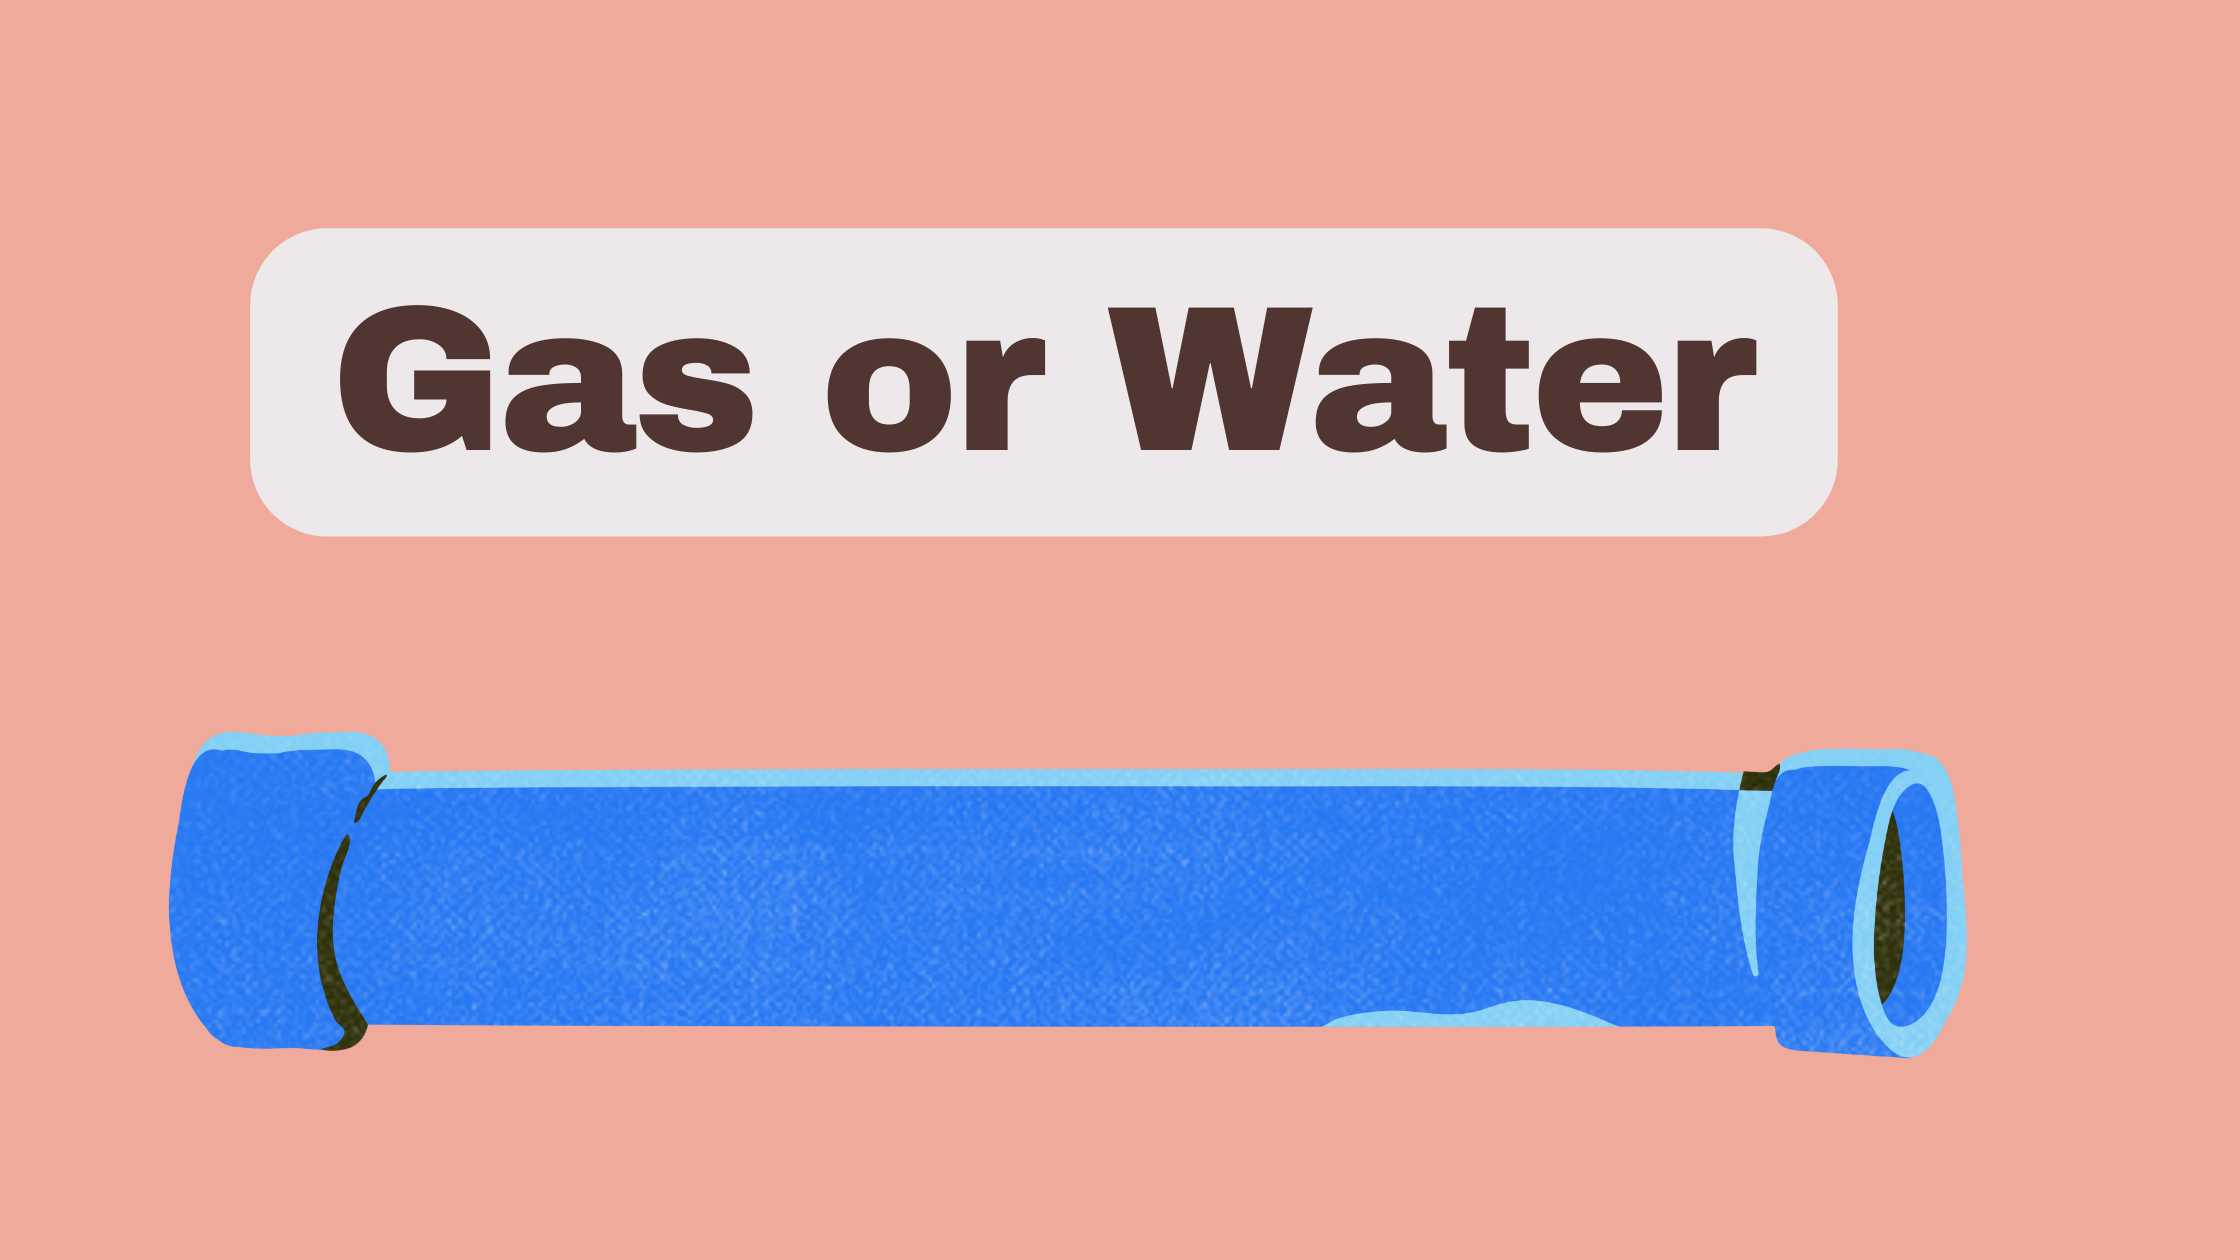 How Do You Tell If a Pipe is Gas or Water?